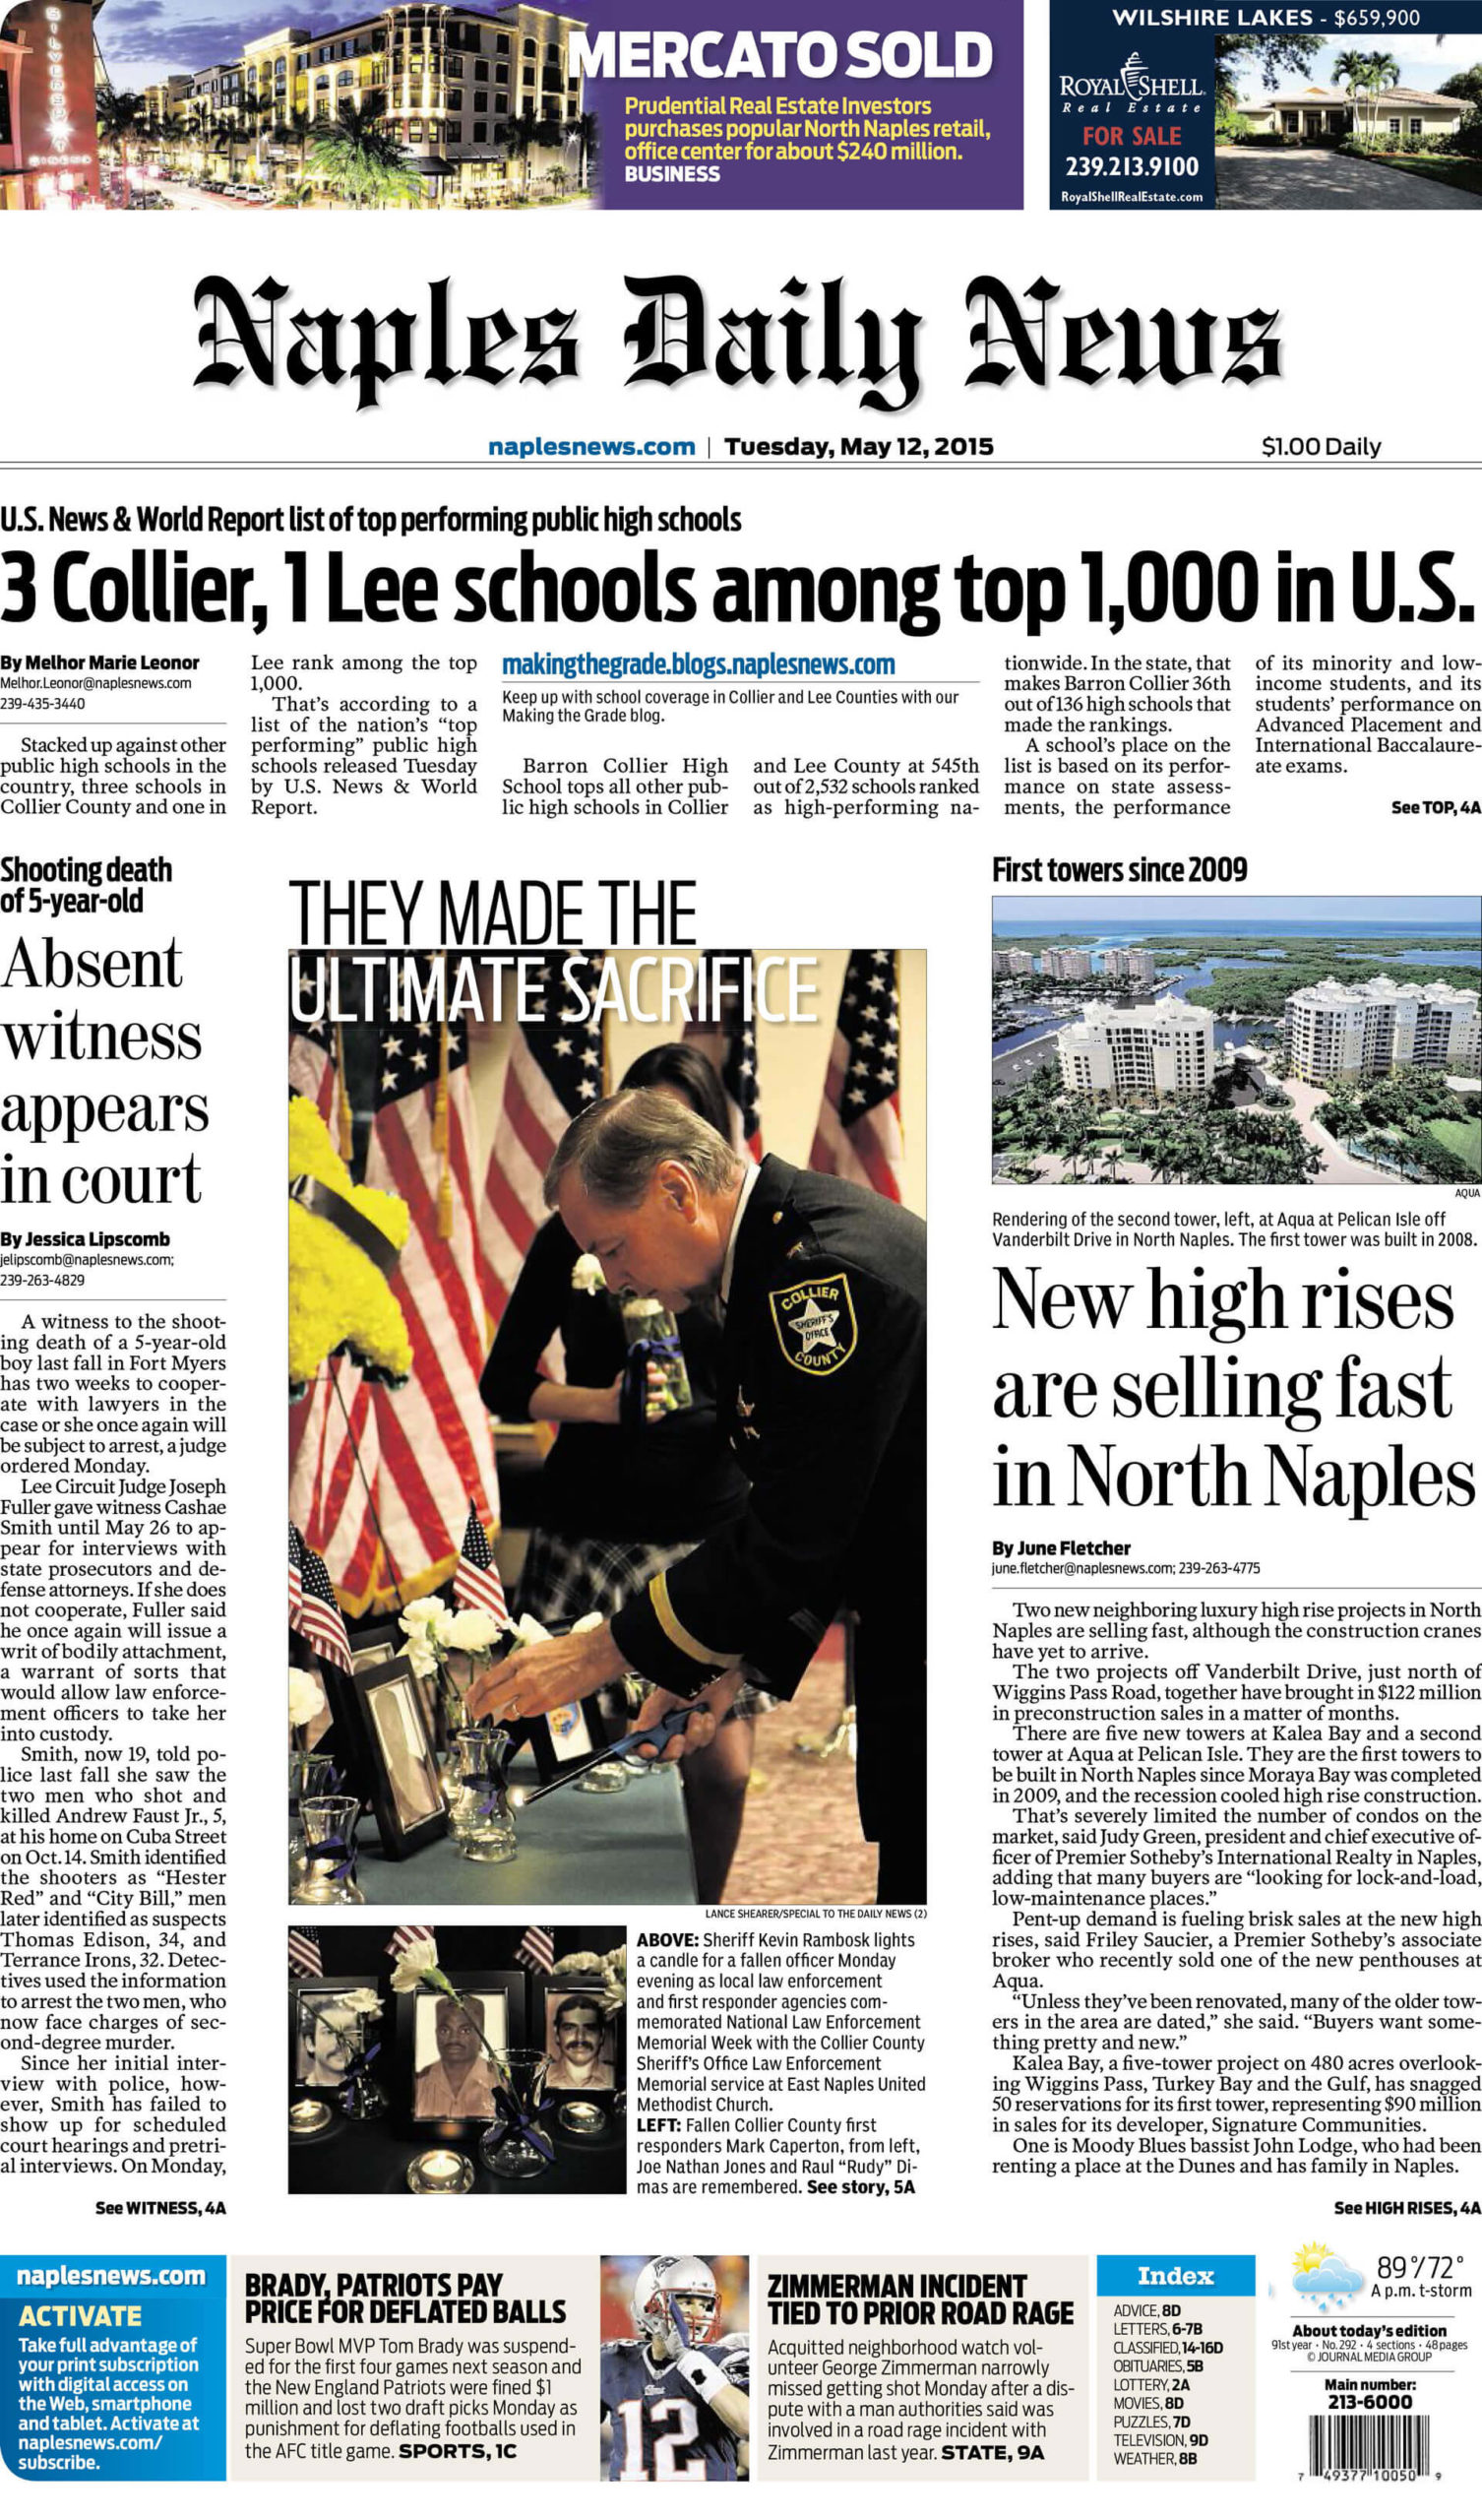 Florida Newspapers 18 Naples Daily News scaled